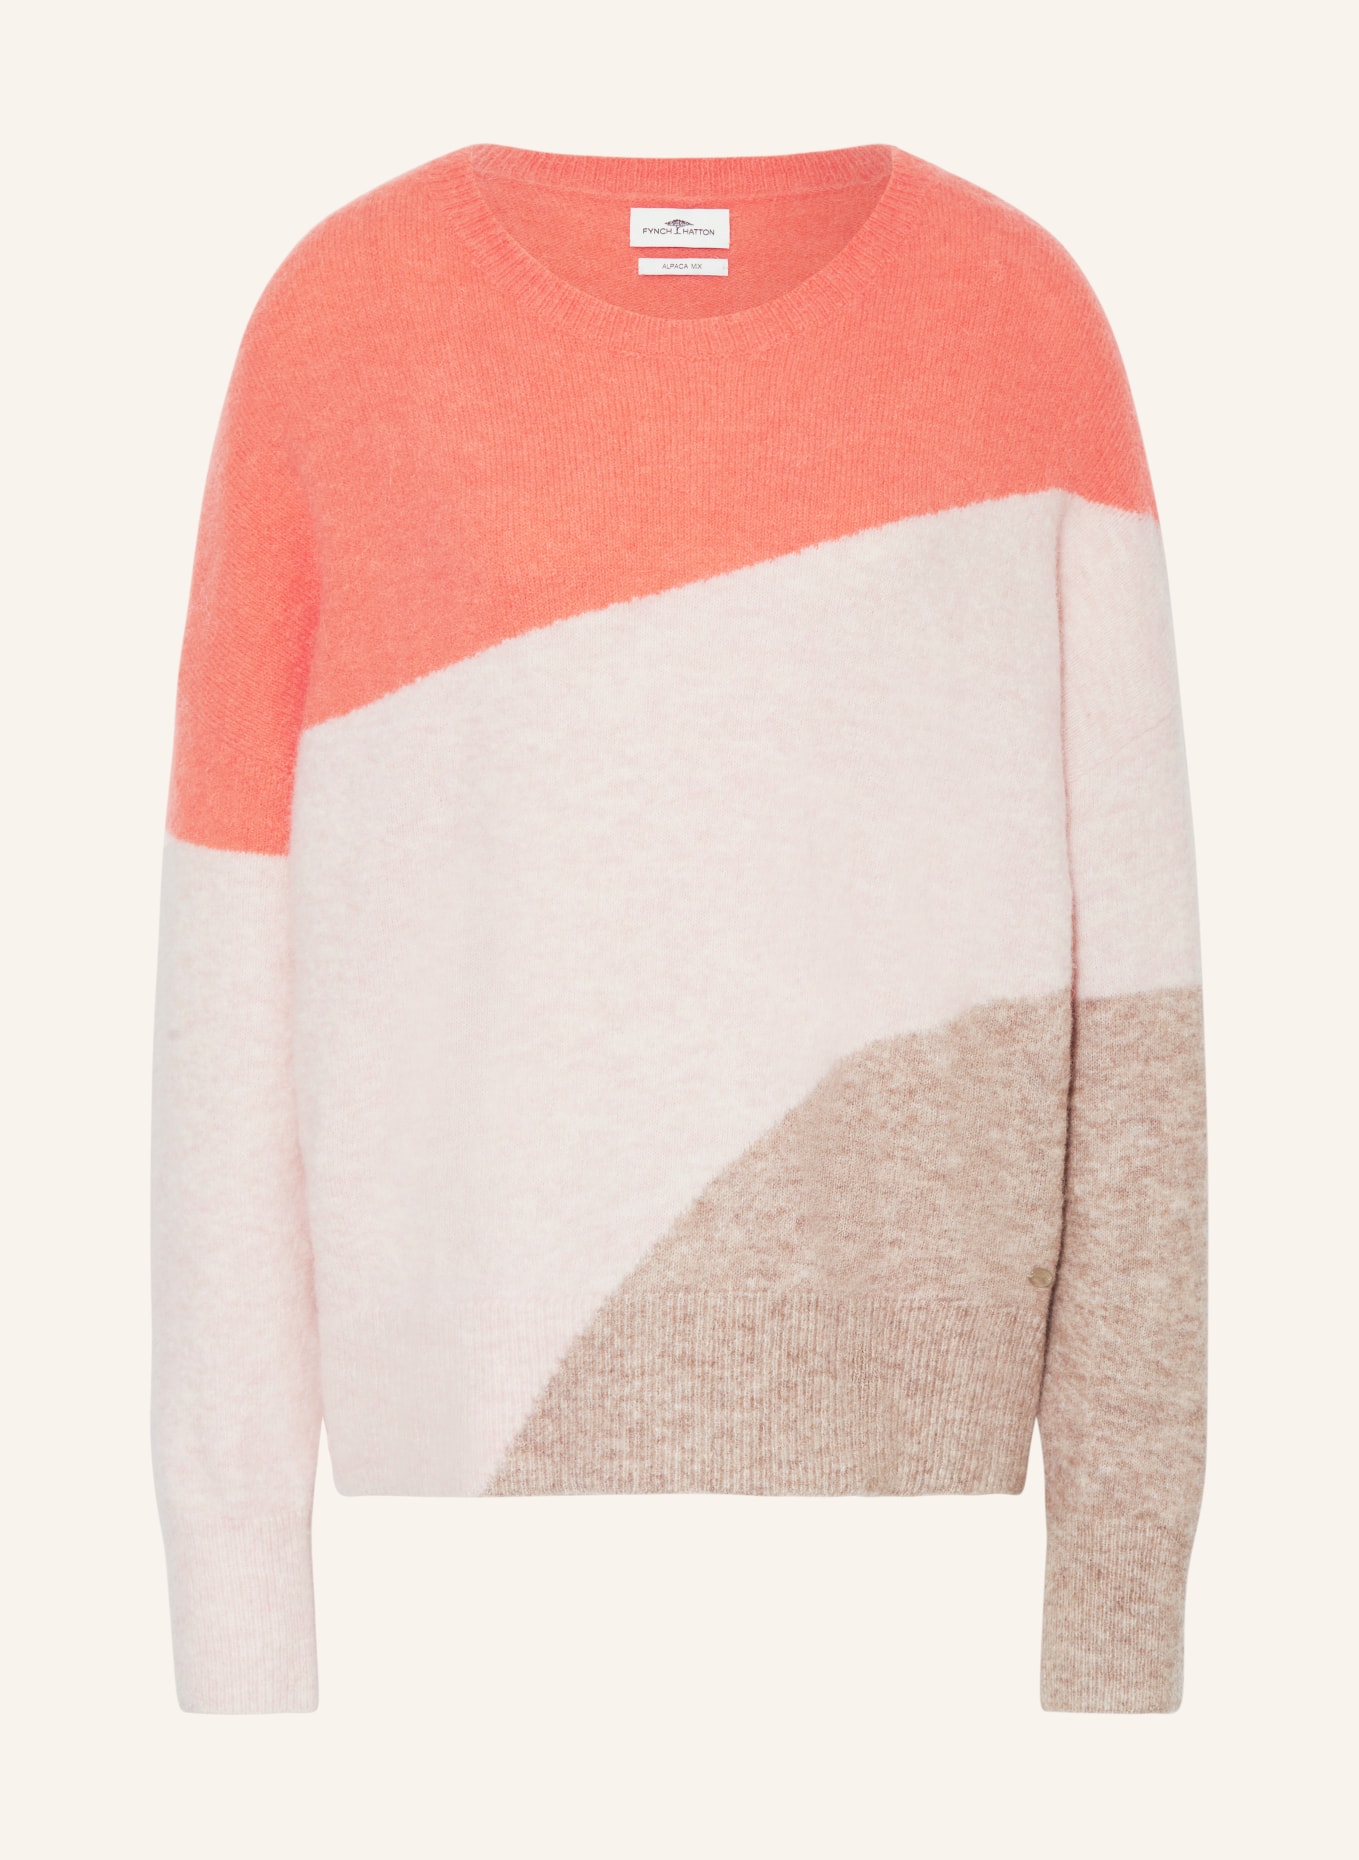 FYNCH-HATTON Sweater with alpaca, Color: LIGHT PINK/ LIGHT RED/ BEIGE (Image 1)